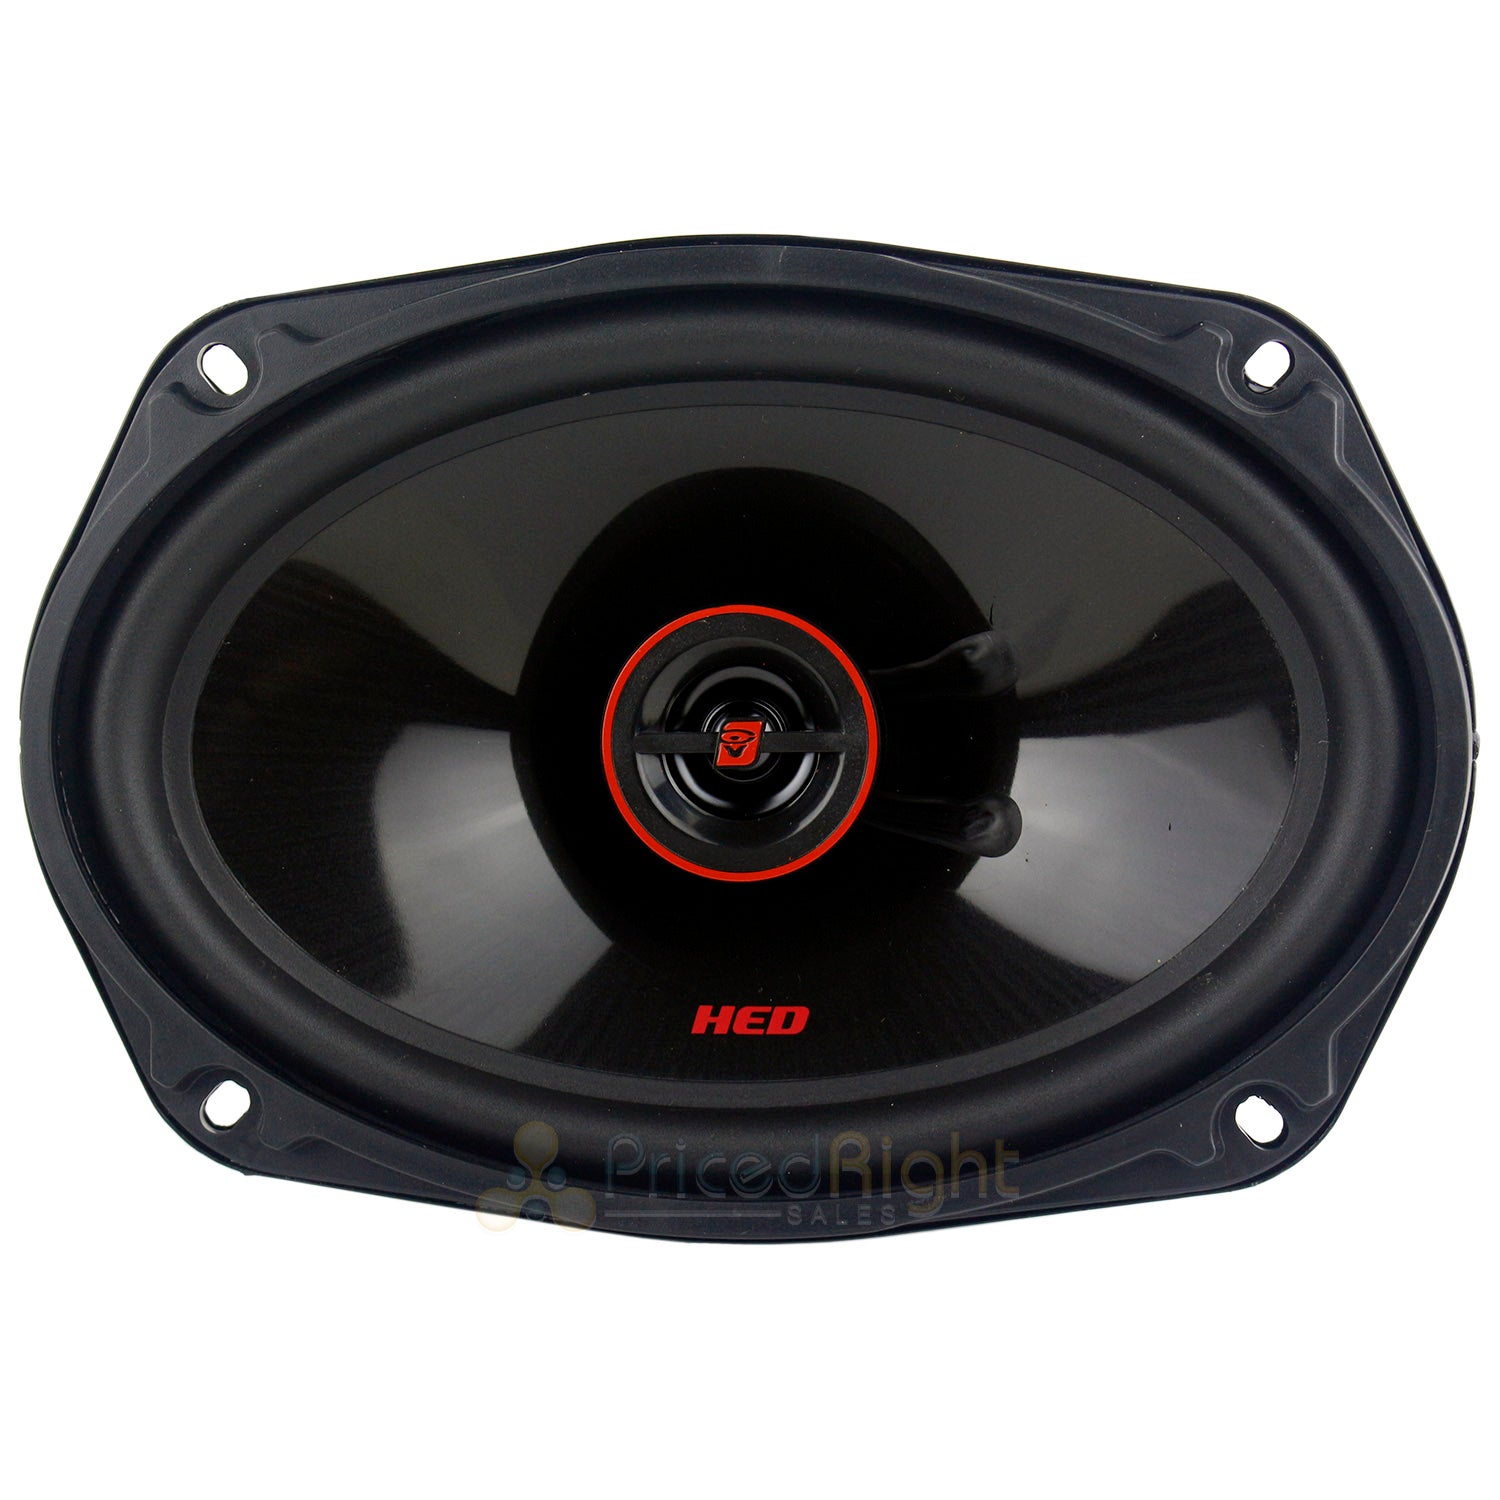 4 Pack Cerwin Vega 6x9" 2 Way Coaxial Speakers 400W Max 55 Watts RMS H7692 HED